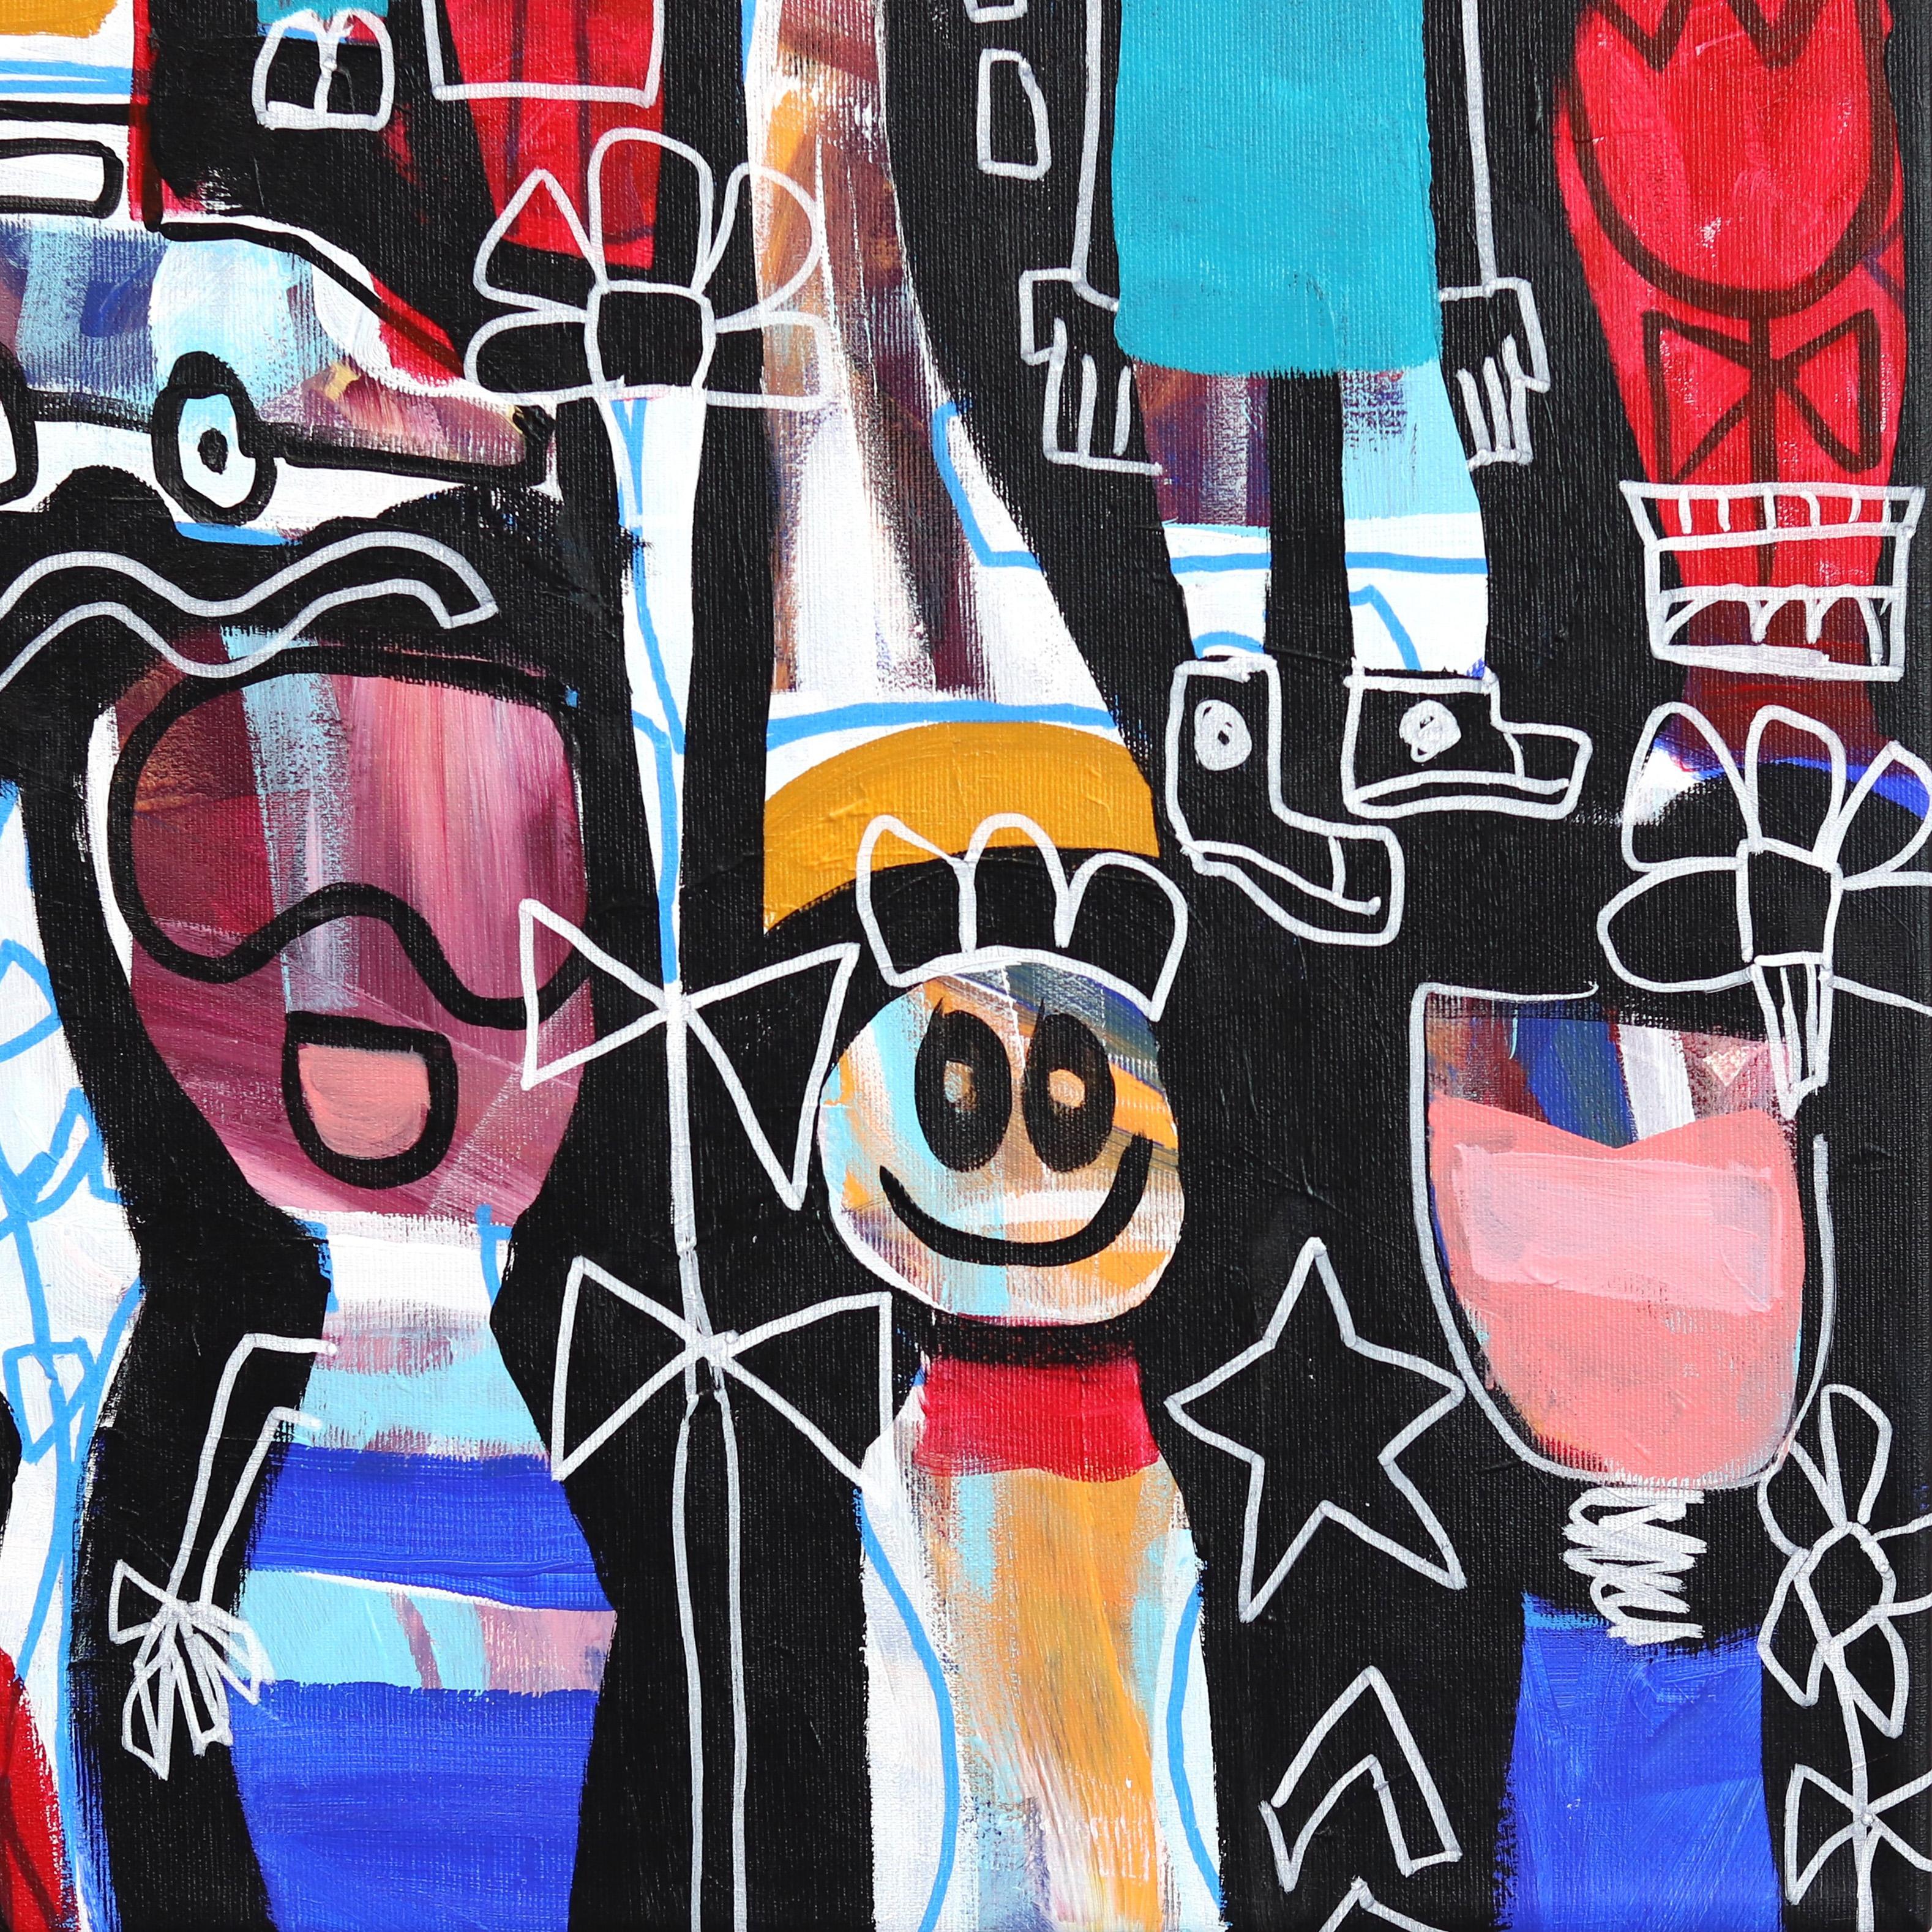 Hands Up - Friends and Family Neo-Expressionist Large Painting on Canvas For Sale 4